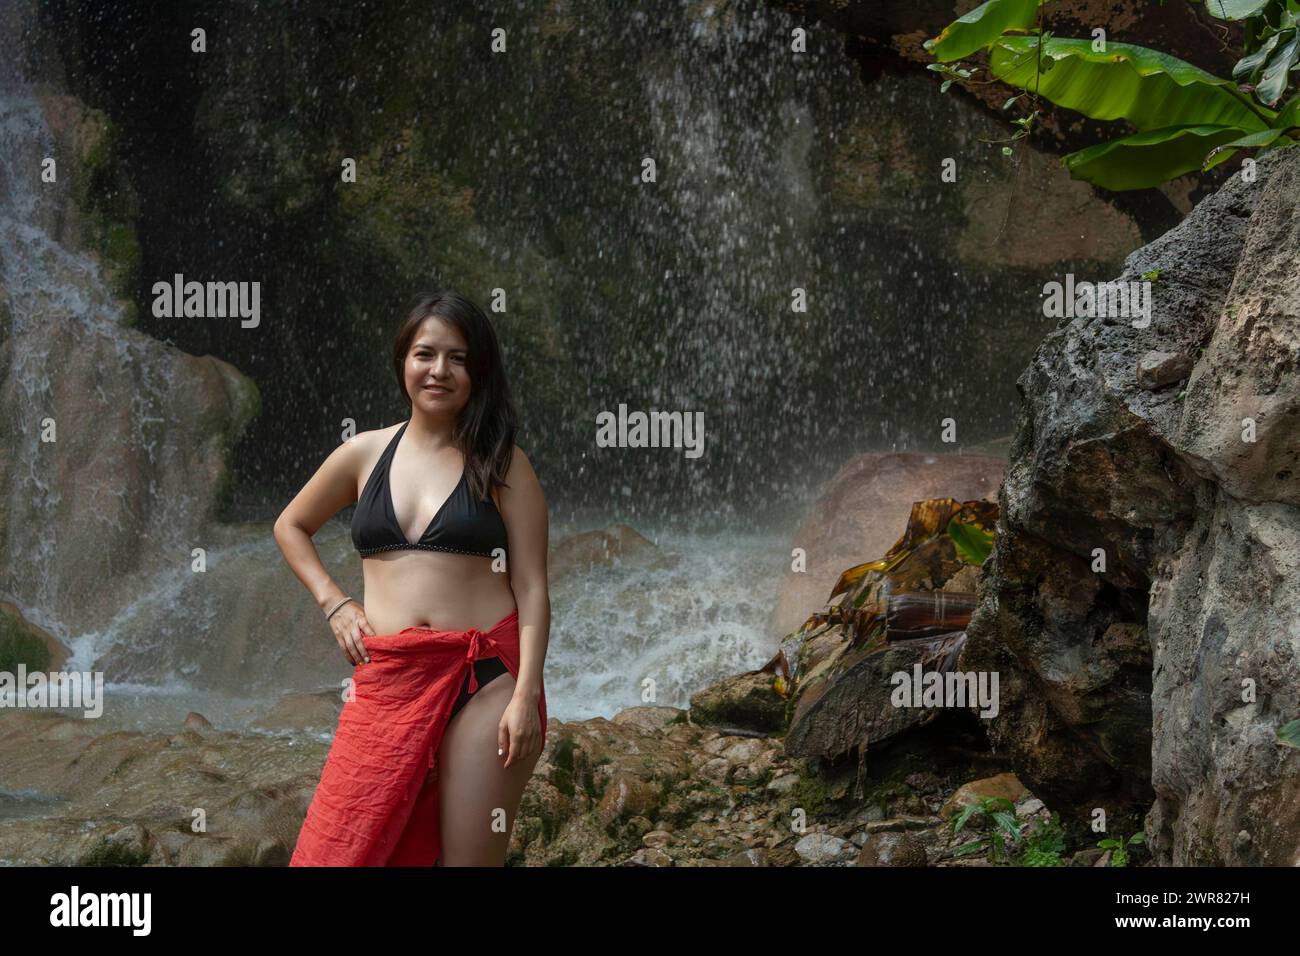 Woman enjoying the cool breeze next to the fresh water waterfall natural environment moss rocks and water in Hidalgo, State of Mexico. Stock Photo